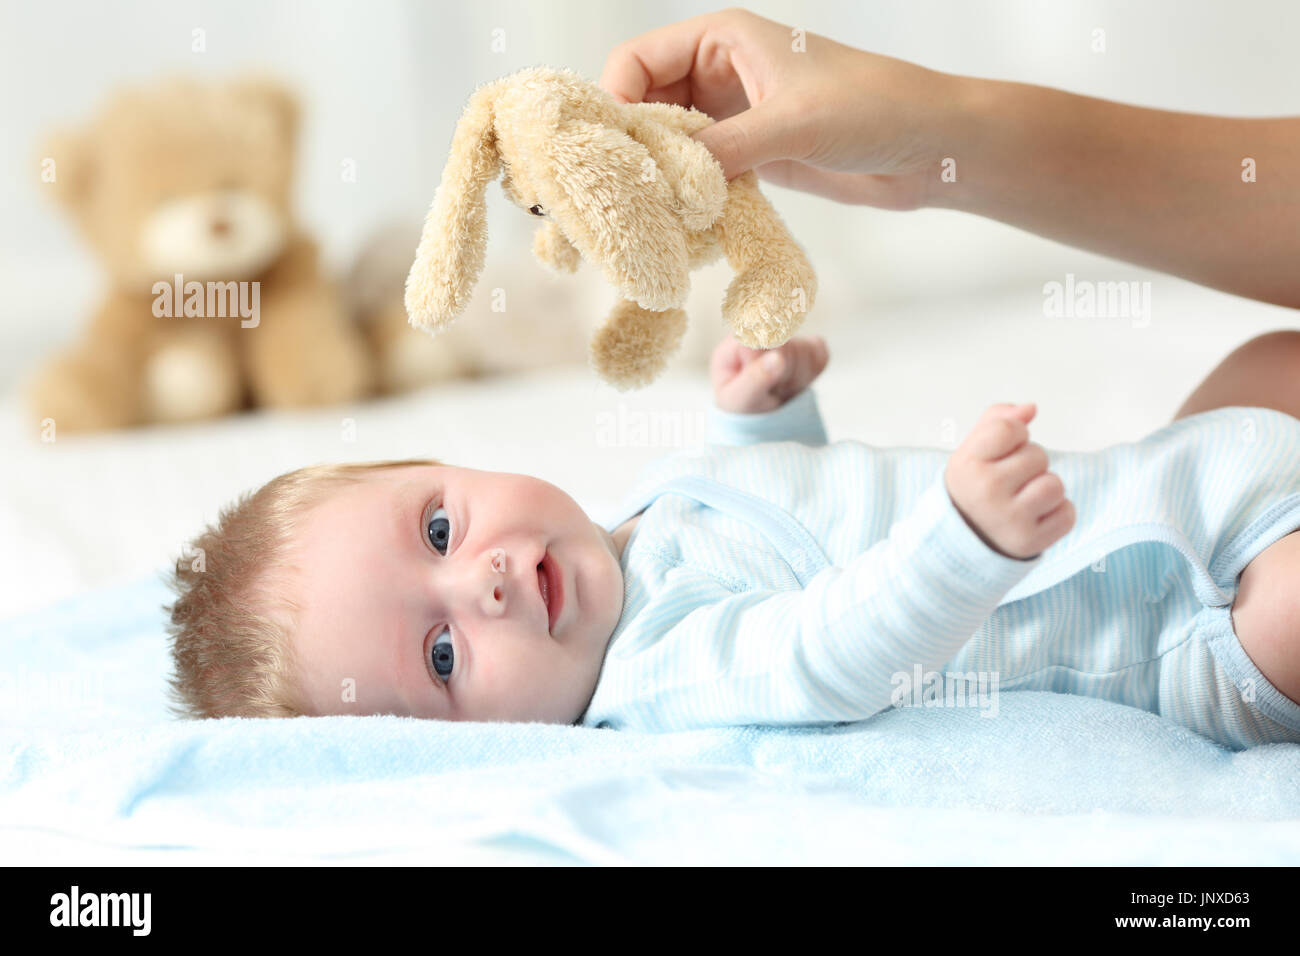 Mother hand holding a teddy and her baby looking at you on a bed Stock Photo